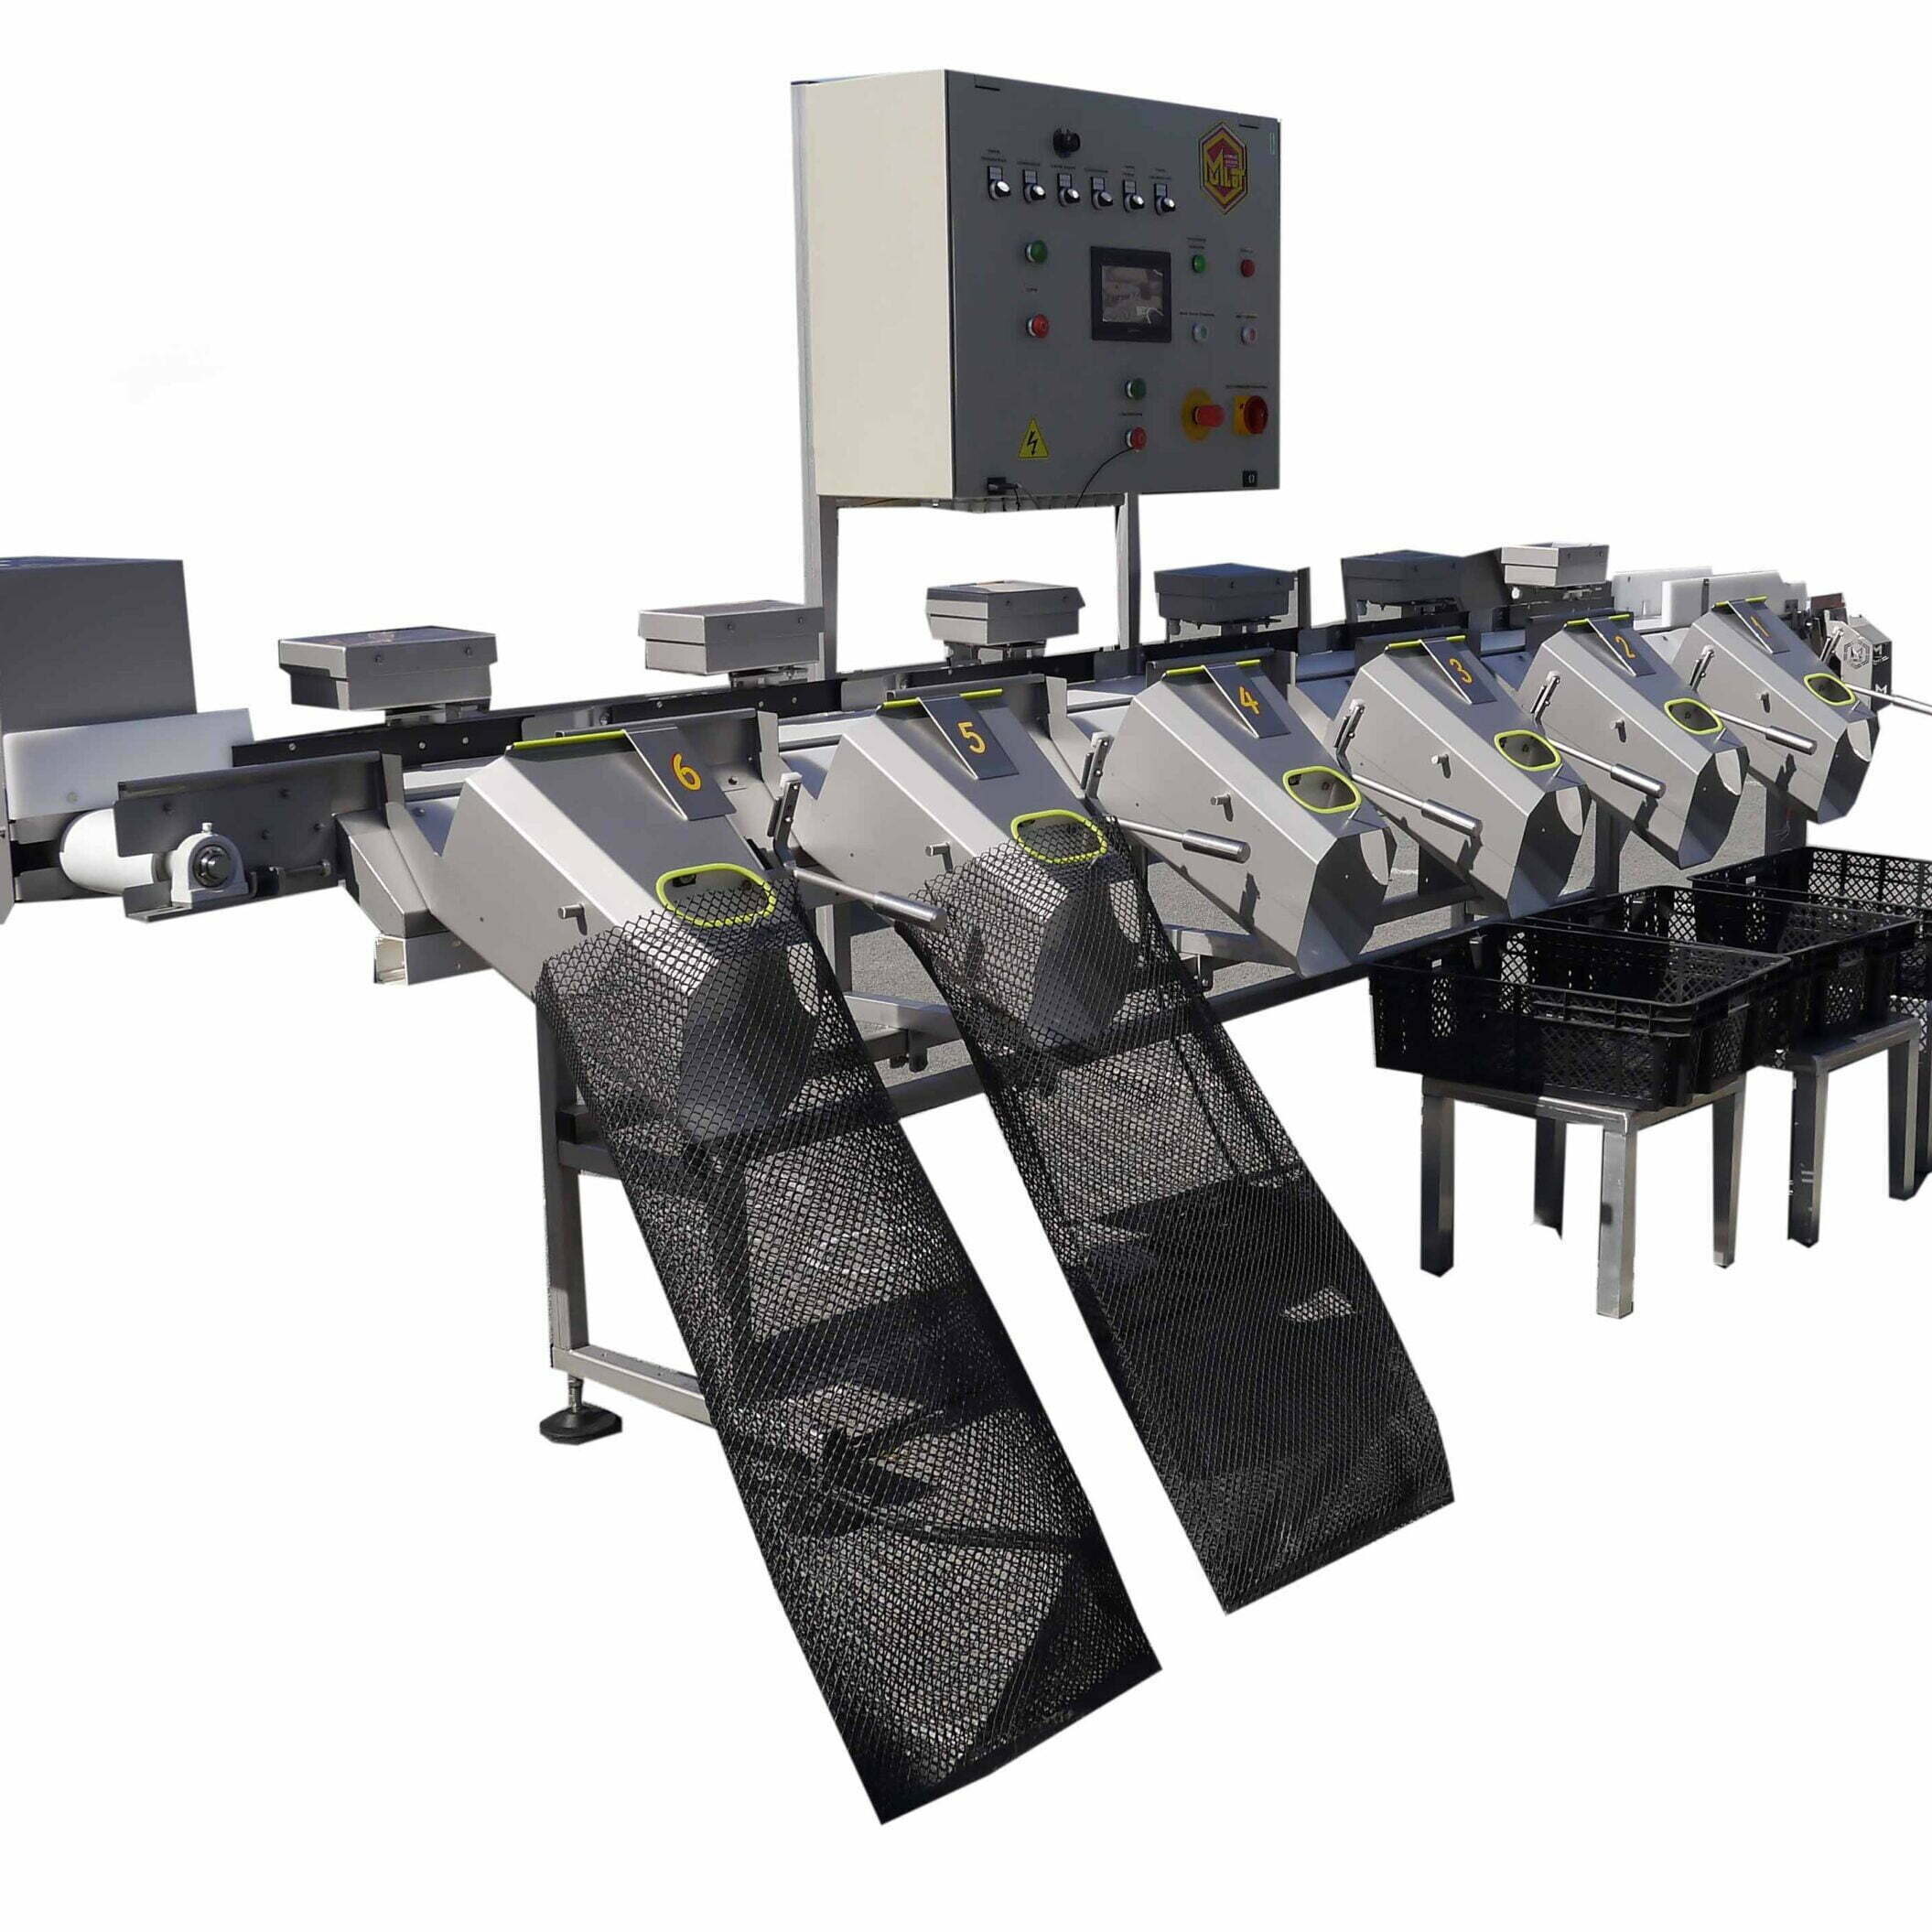 This linear oyster grading machine is to fit into any building to help you with shellfish farming machine for oysters and mussels or other shell